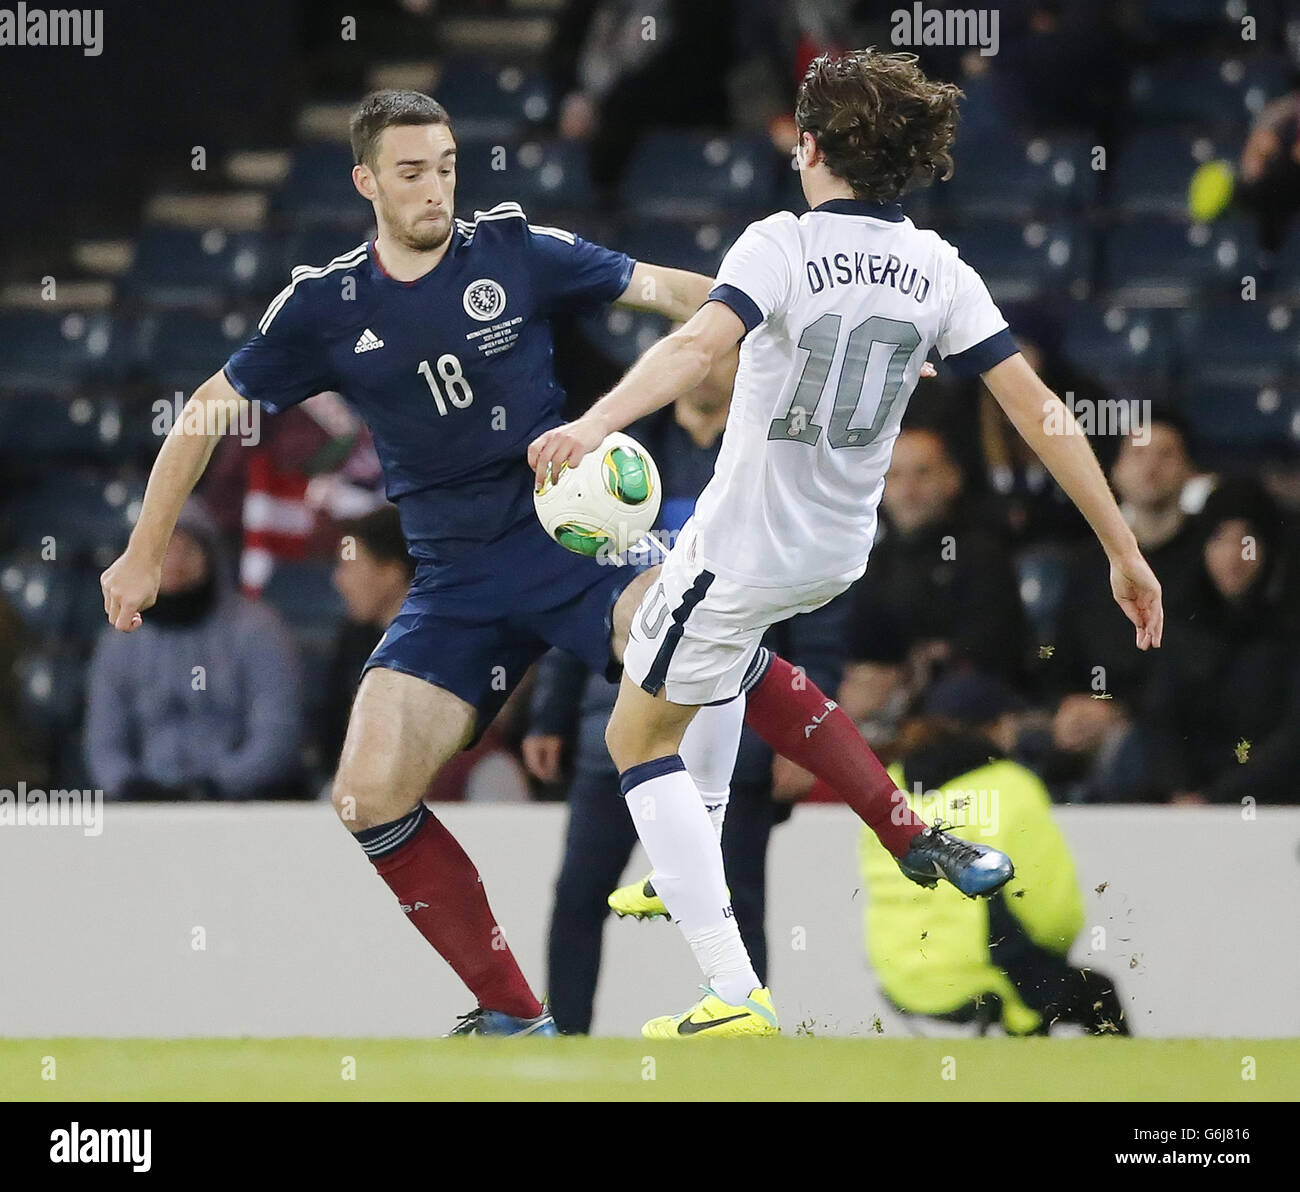 Soccer - International Friendly - Scotland v USA - Hampden Park. Scotland's Lee Wallace and USA's Mix Diskerud battle for the ball during the International Friendly at Hampden Park, Glasgow. Stock Photo